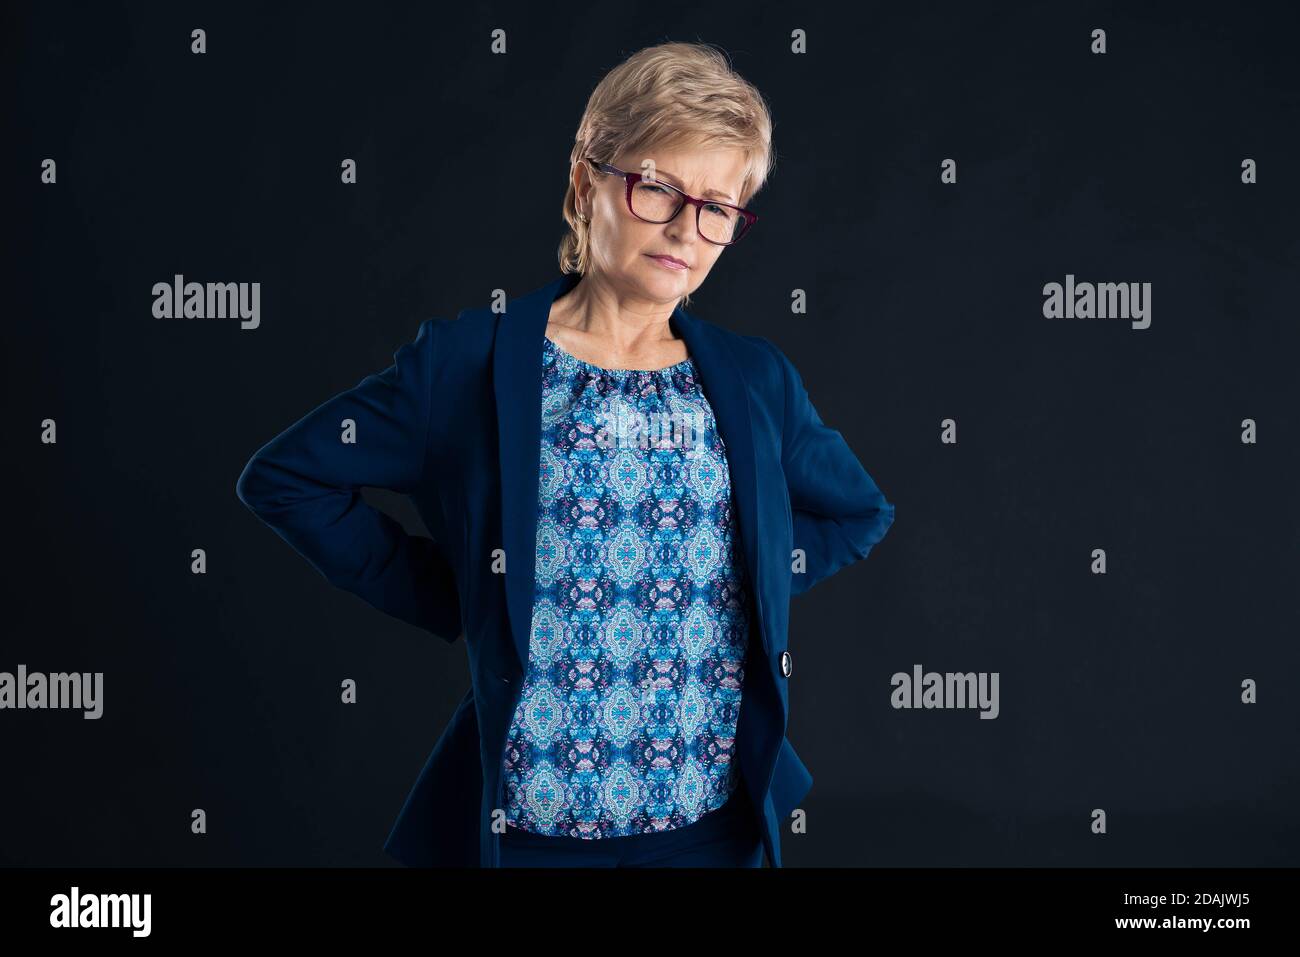 Older businesswoman having lower back pain from sitting down too much wearing a blue jacket Stock Photo